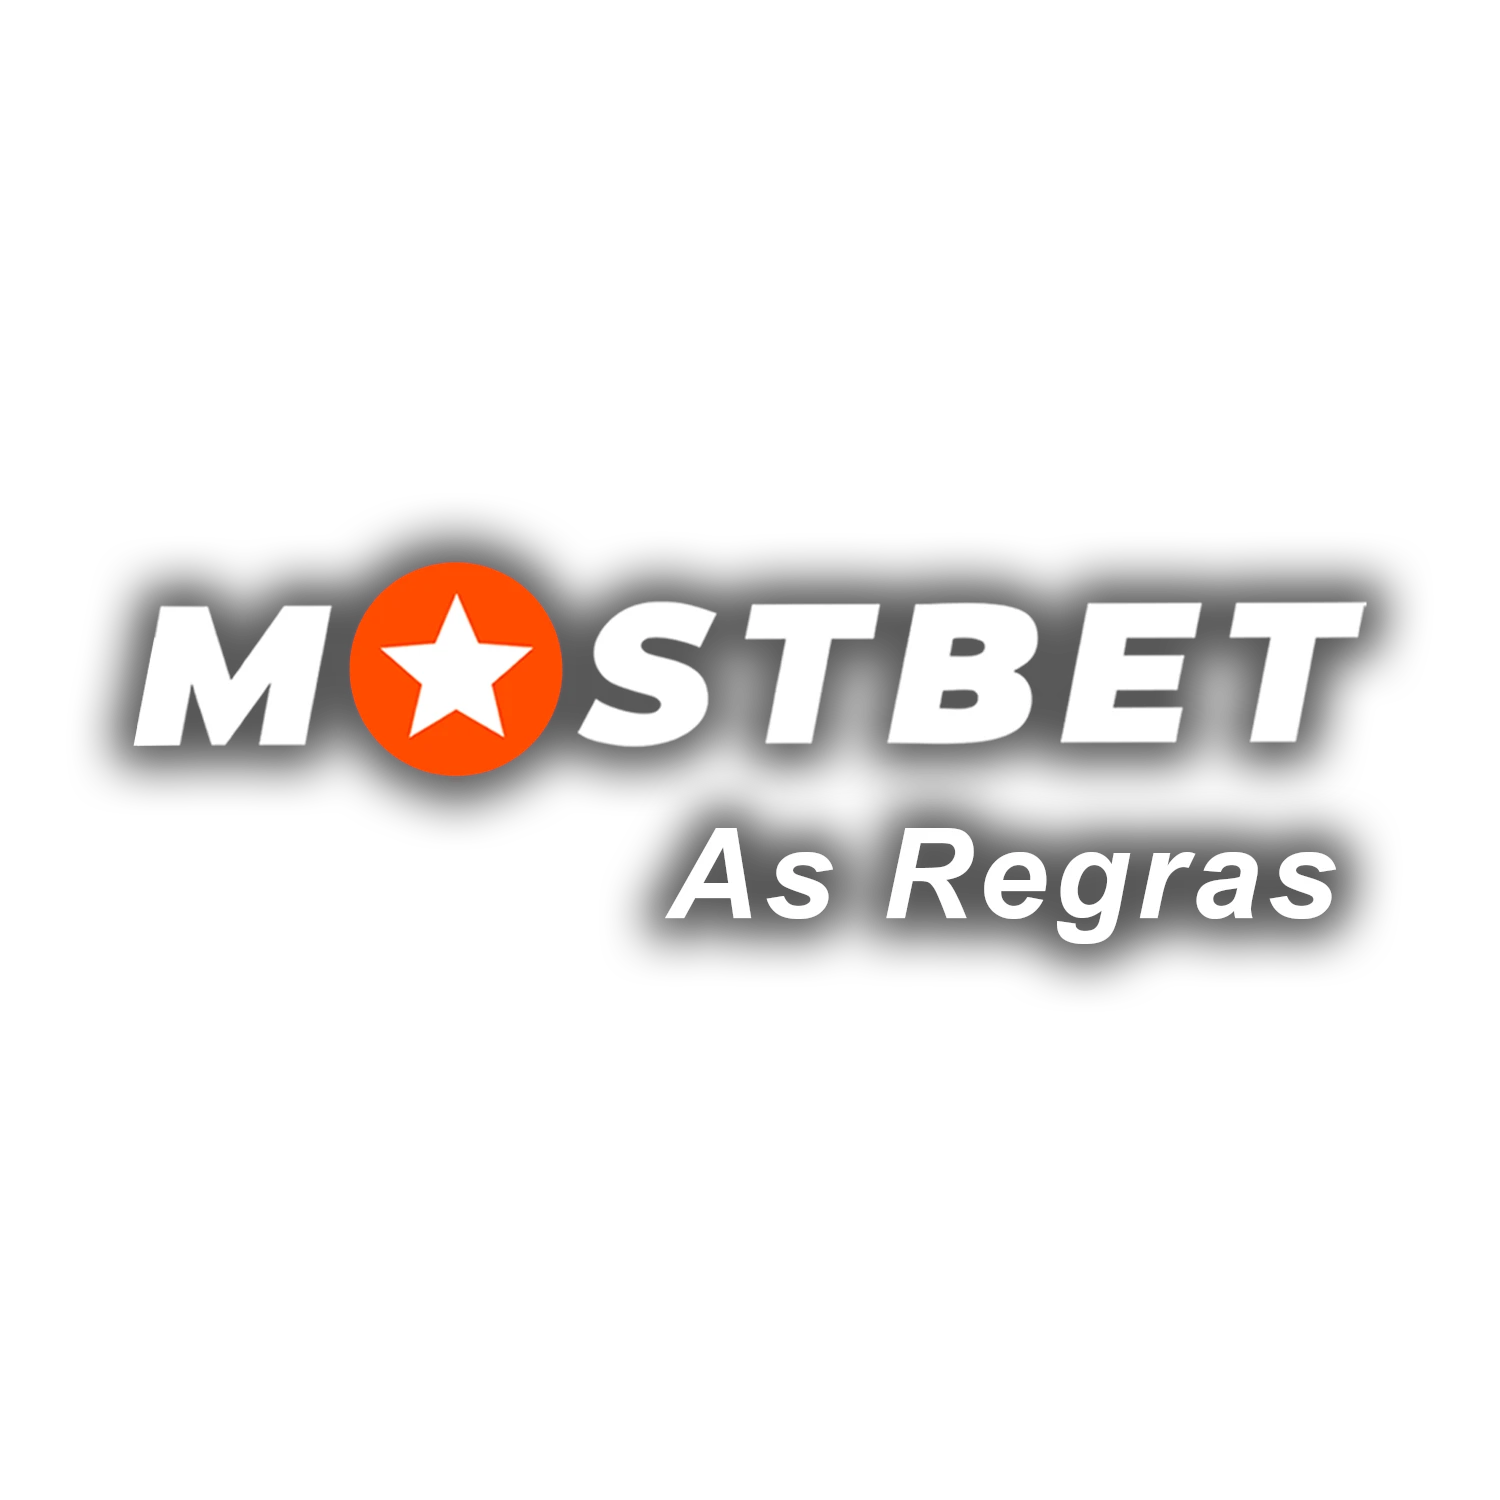 Learn which rules you must follow at Mostbet.